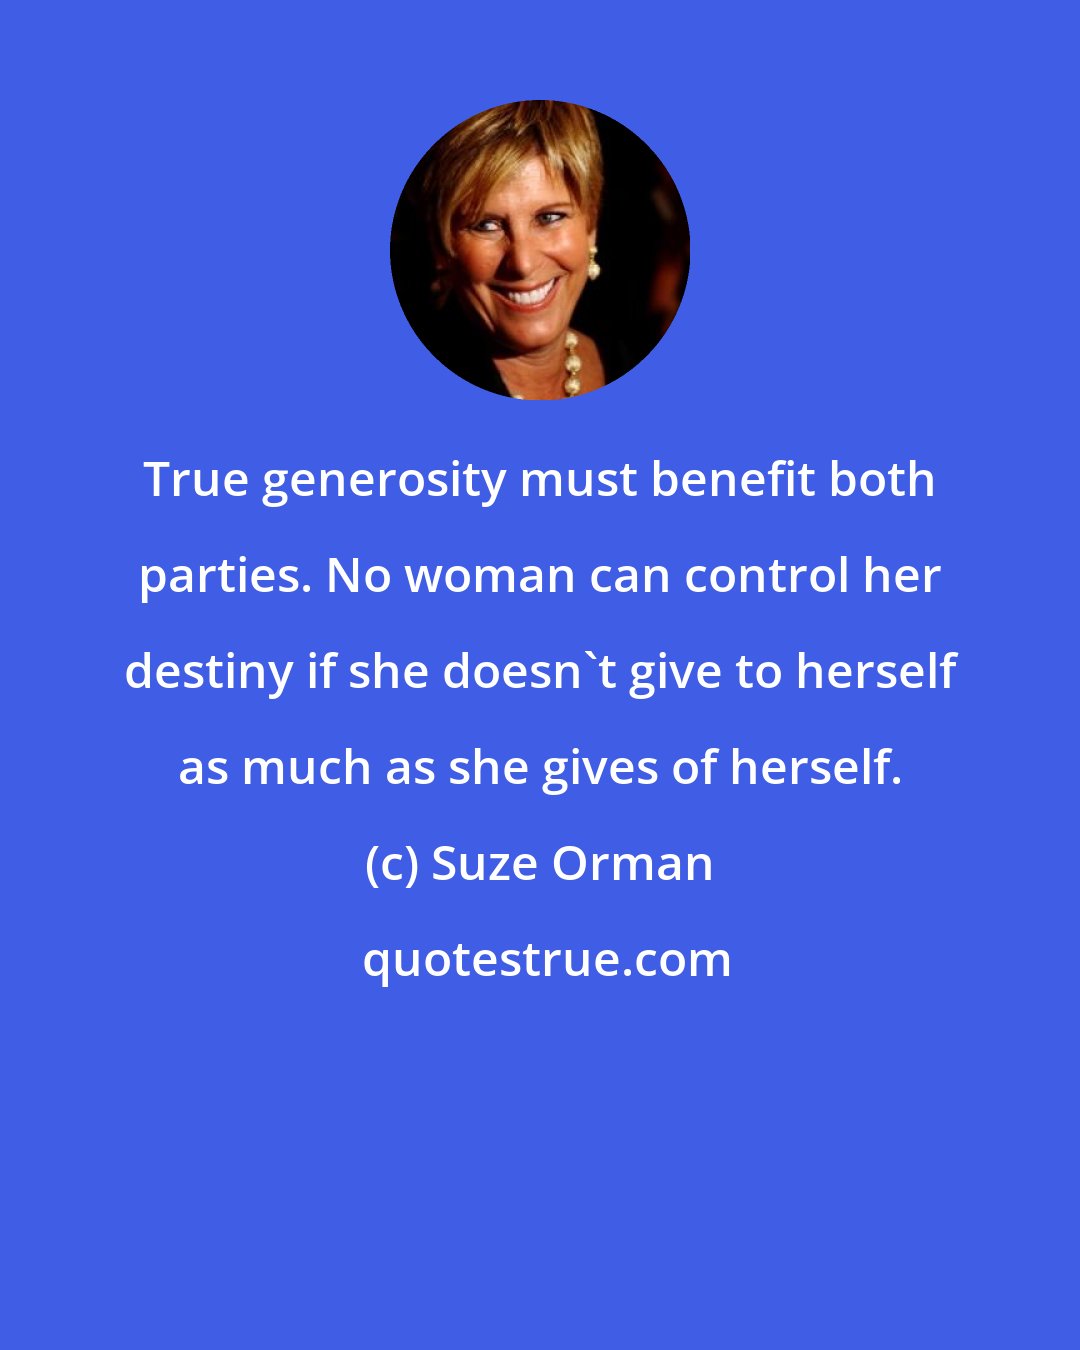 Suze Orman: True generosity must benefit both parties. No woman can control her destiny if she doesn't give to herself as much as she gives of herself.